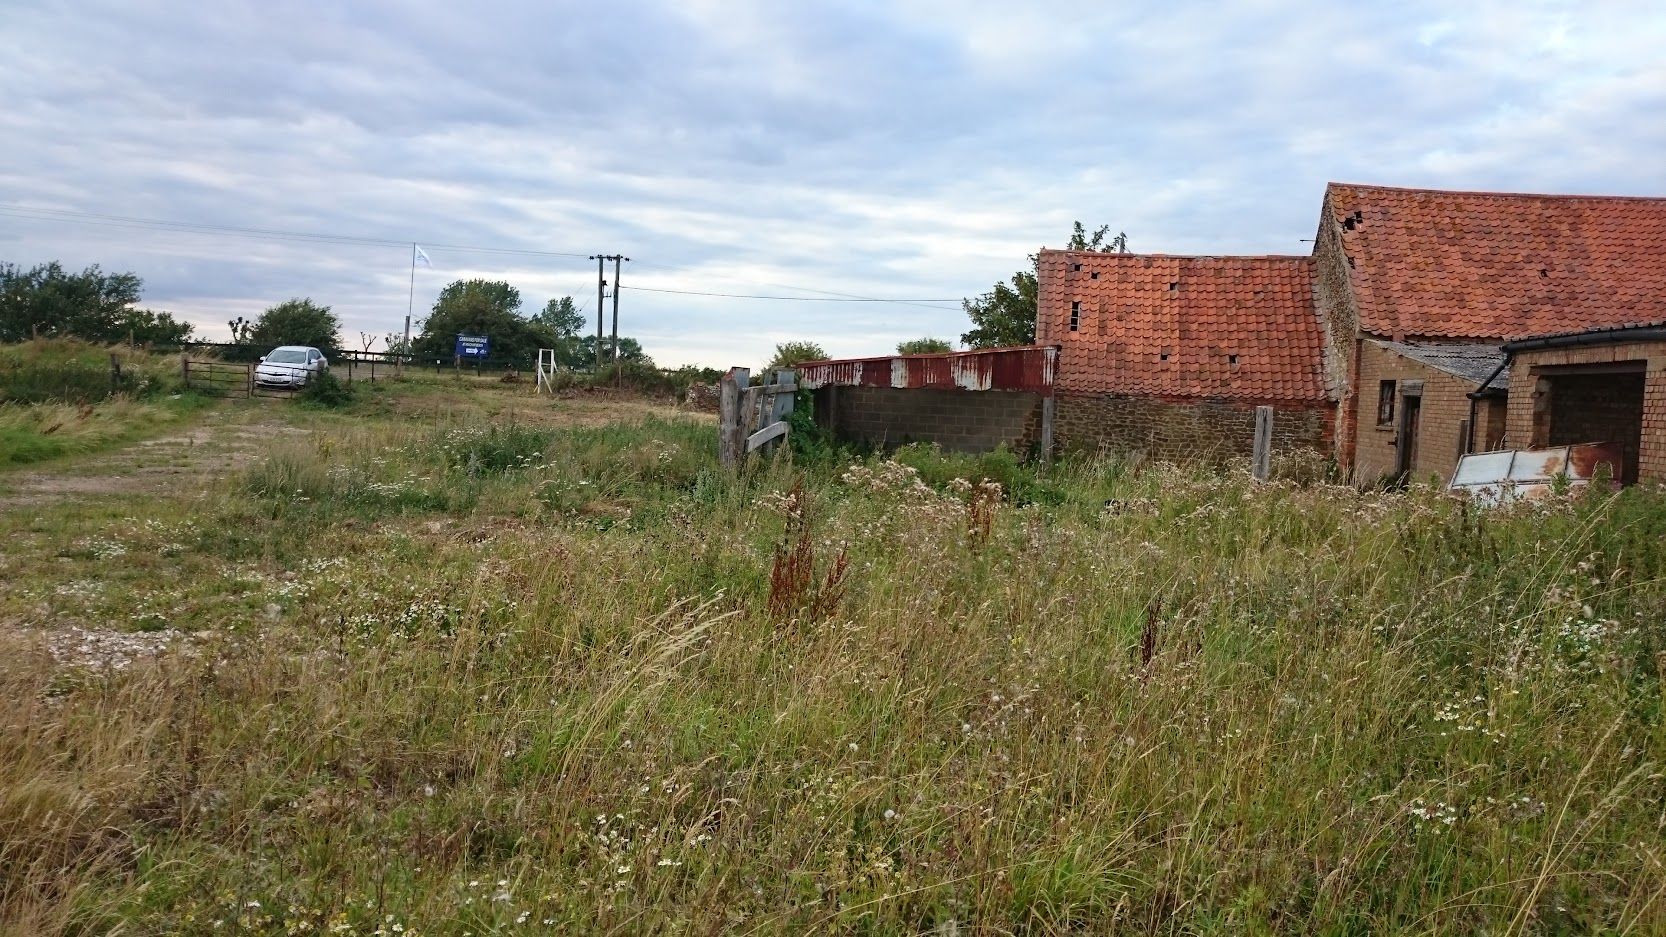 overgrown garden with dilapidated farm buildings to the side